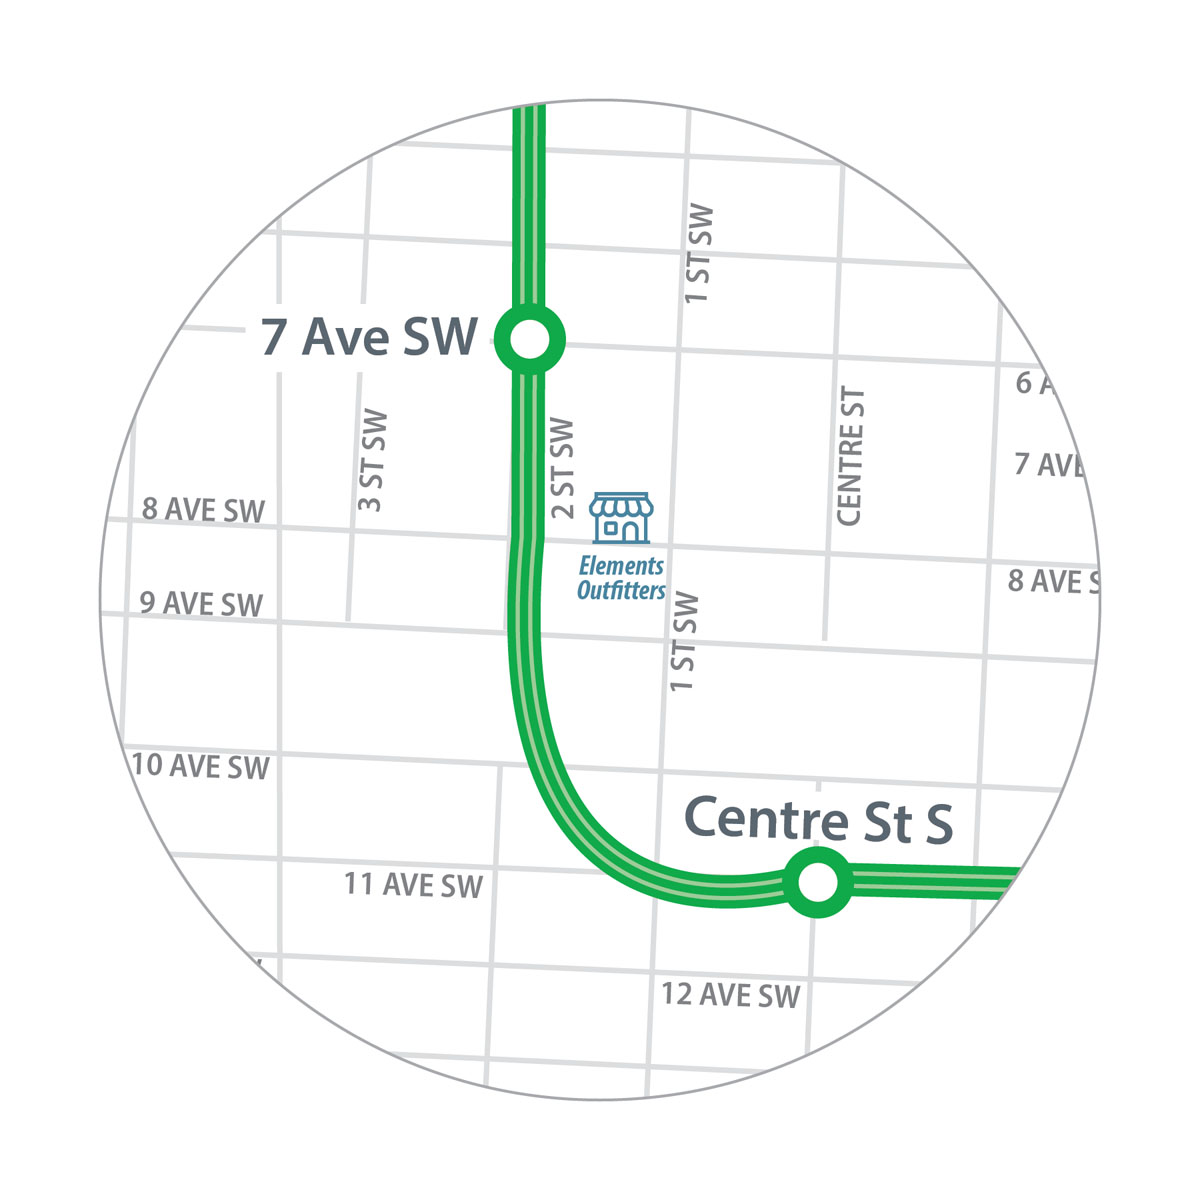 Map of Elements Outfitters location in relation to 7 Avenue S.W. and Centre Street S. Stations.